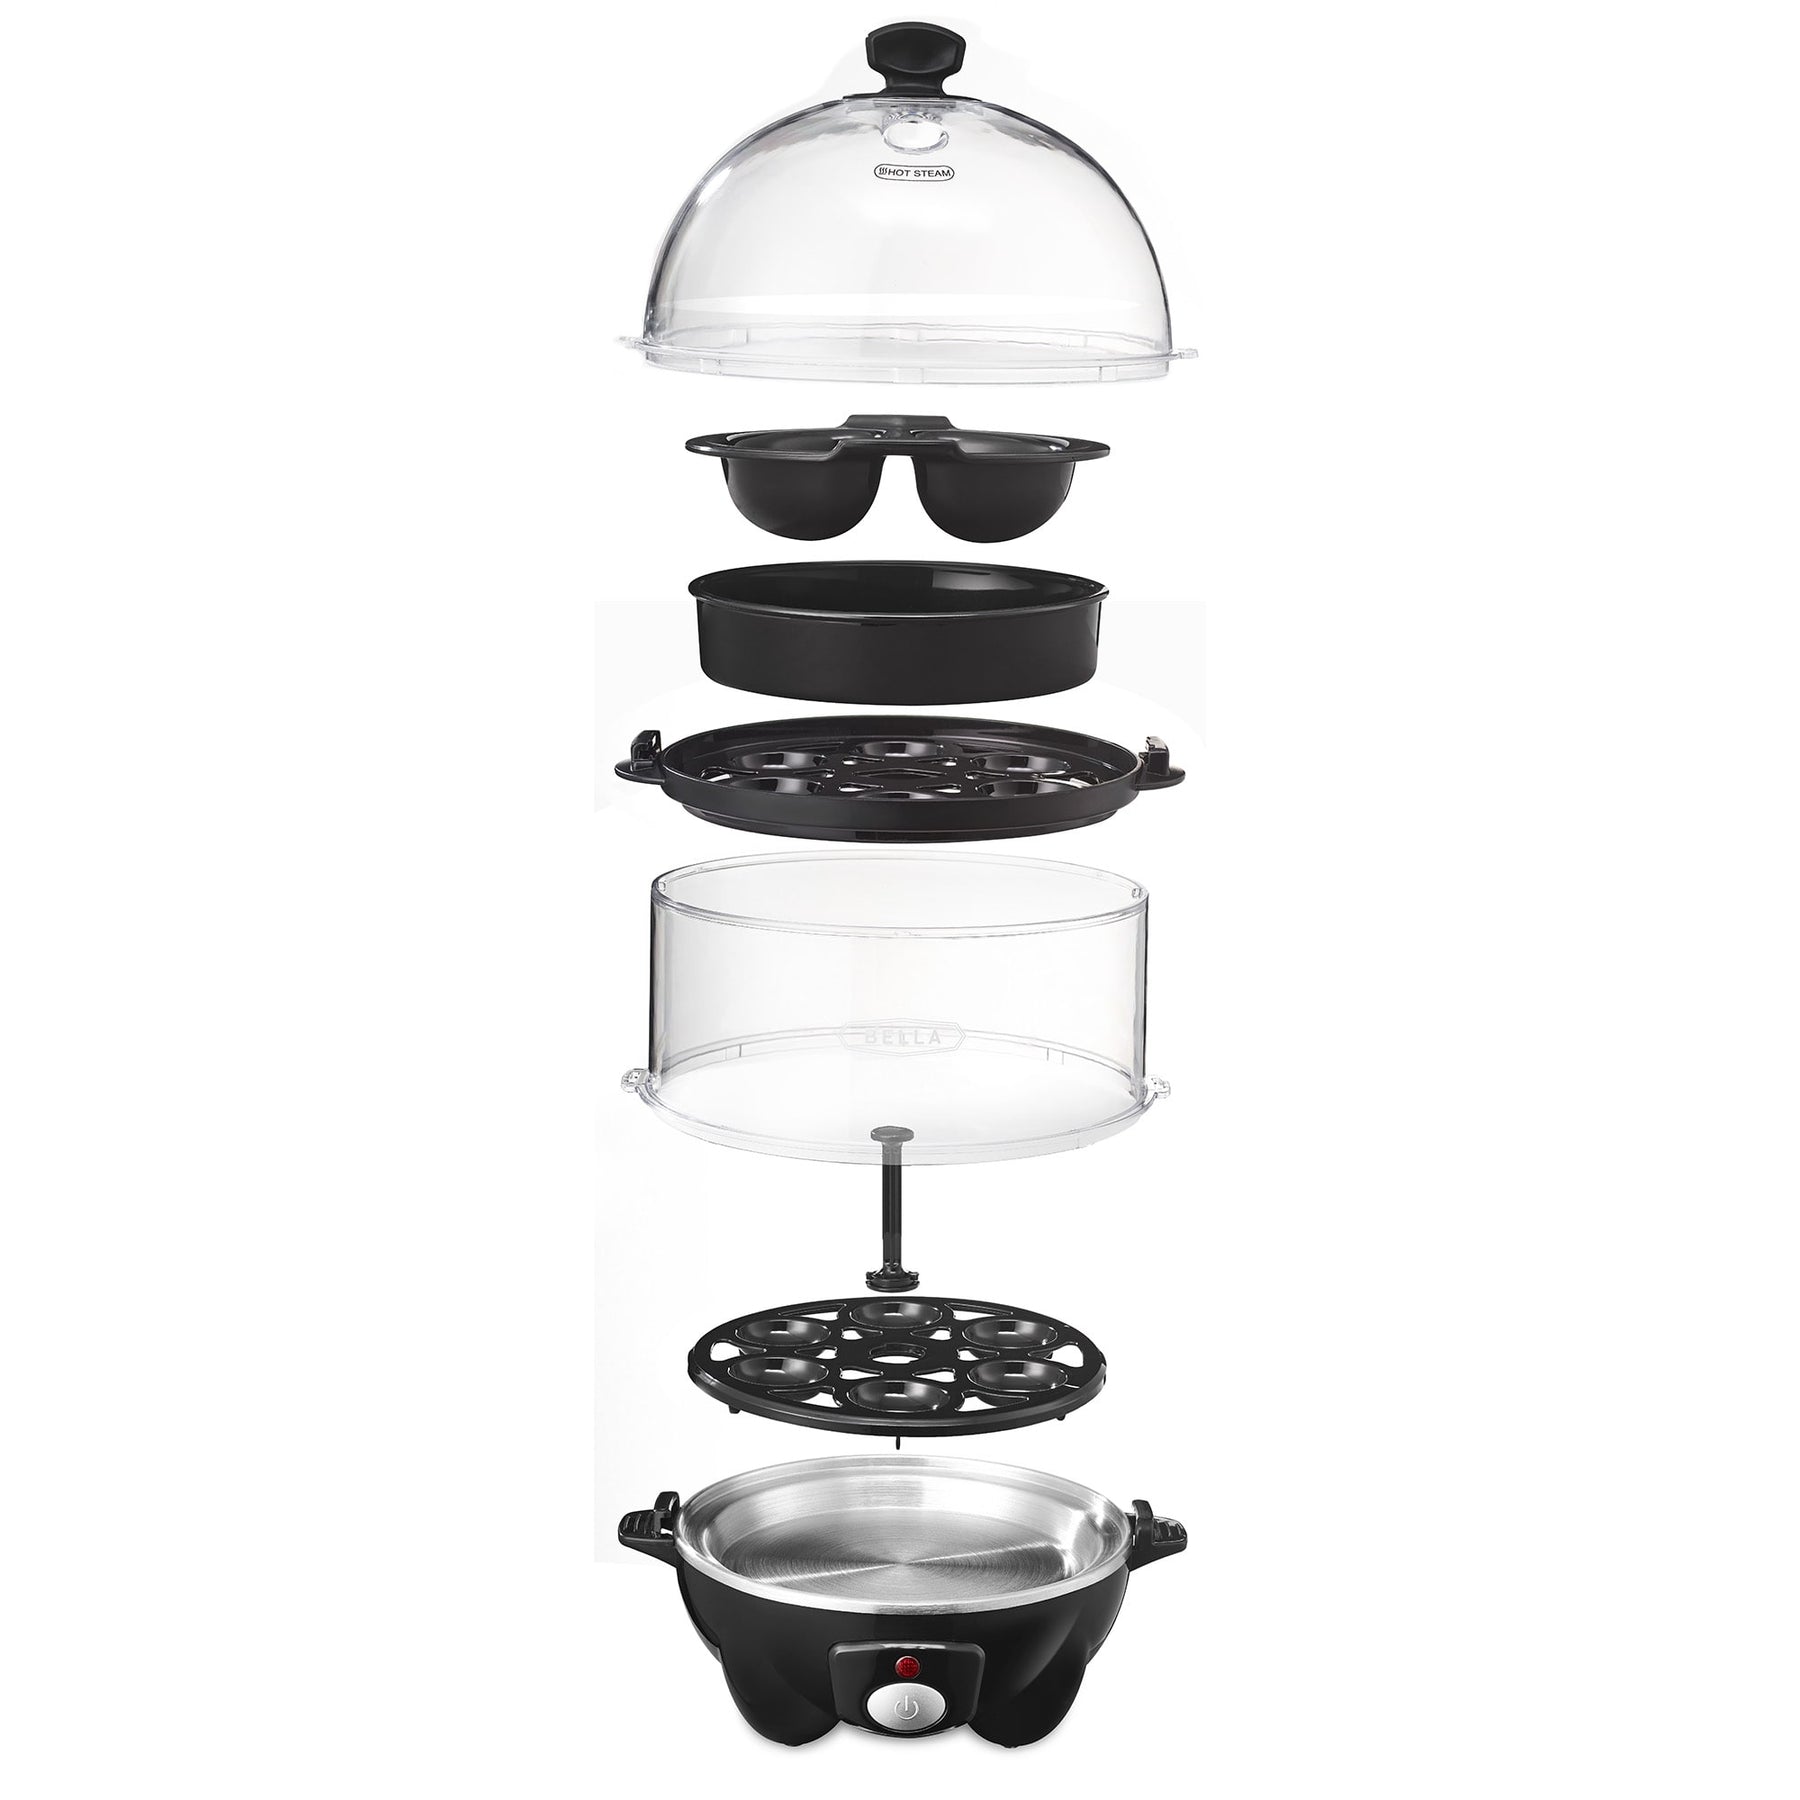 Introducing BELLA Double Tier Egg Cooker Up To 12 Large Boiled